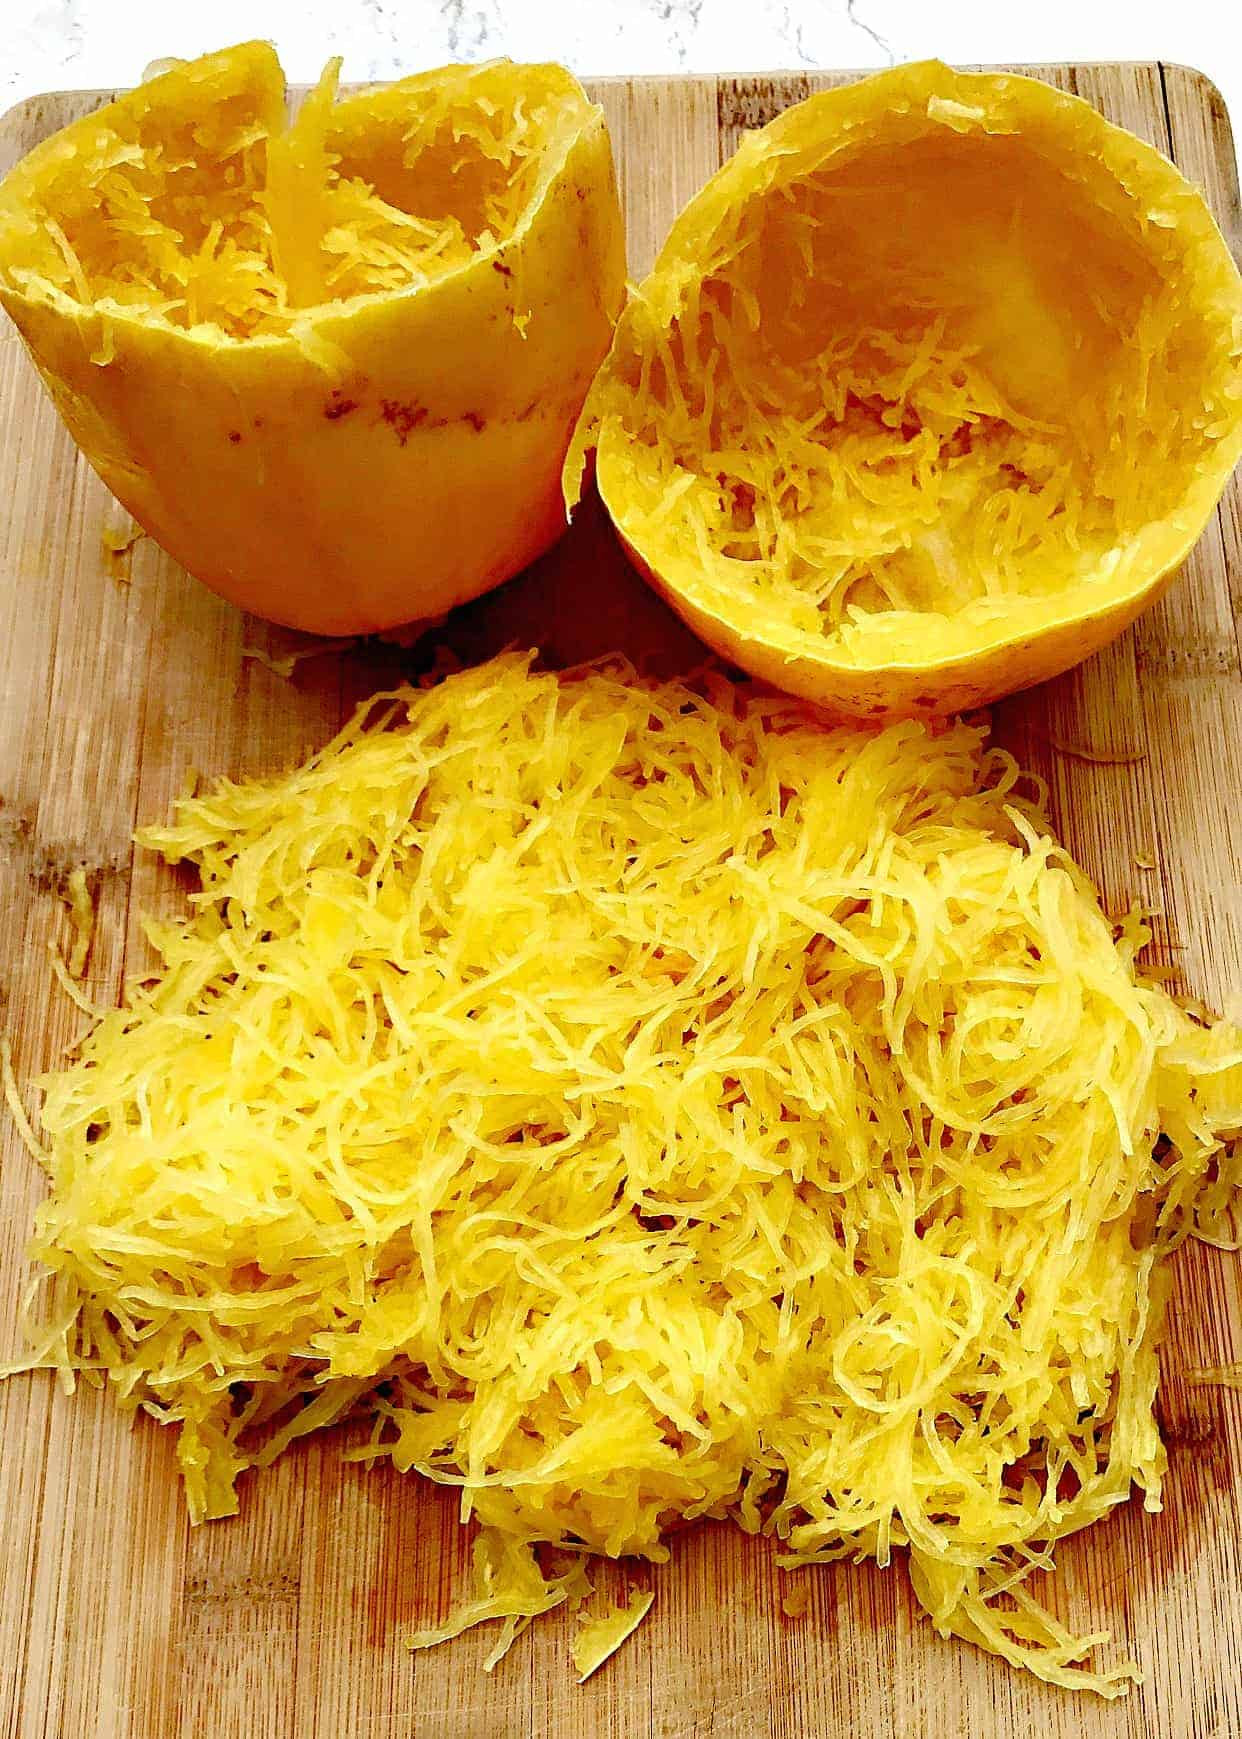 Spaghetti Squash In The Instant Pot
 How to Make Spaghetti Squash Using the Instant Pot